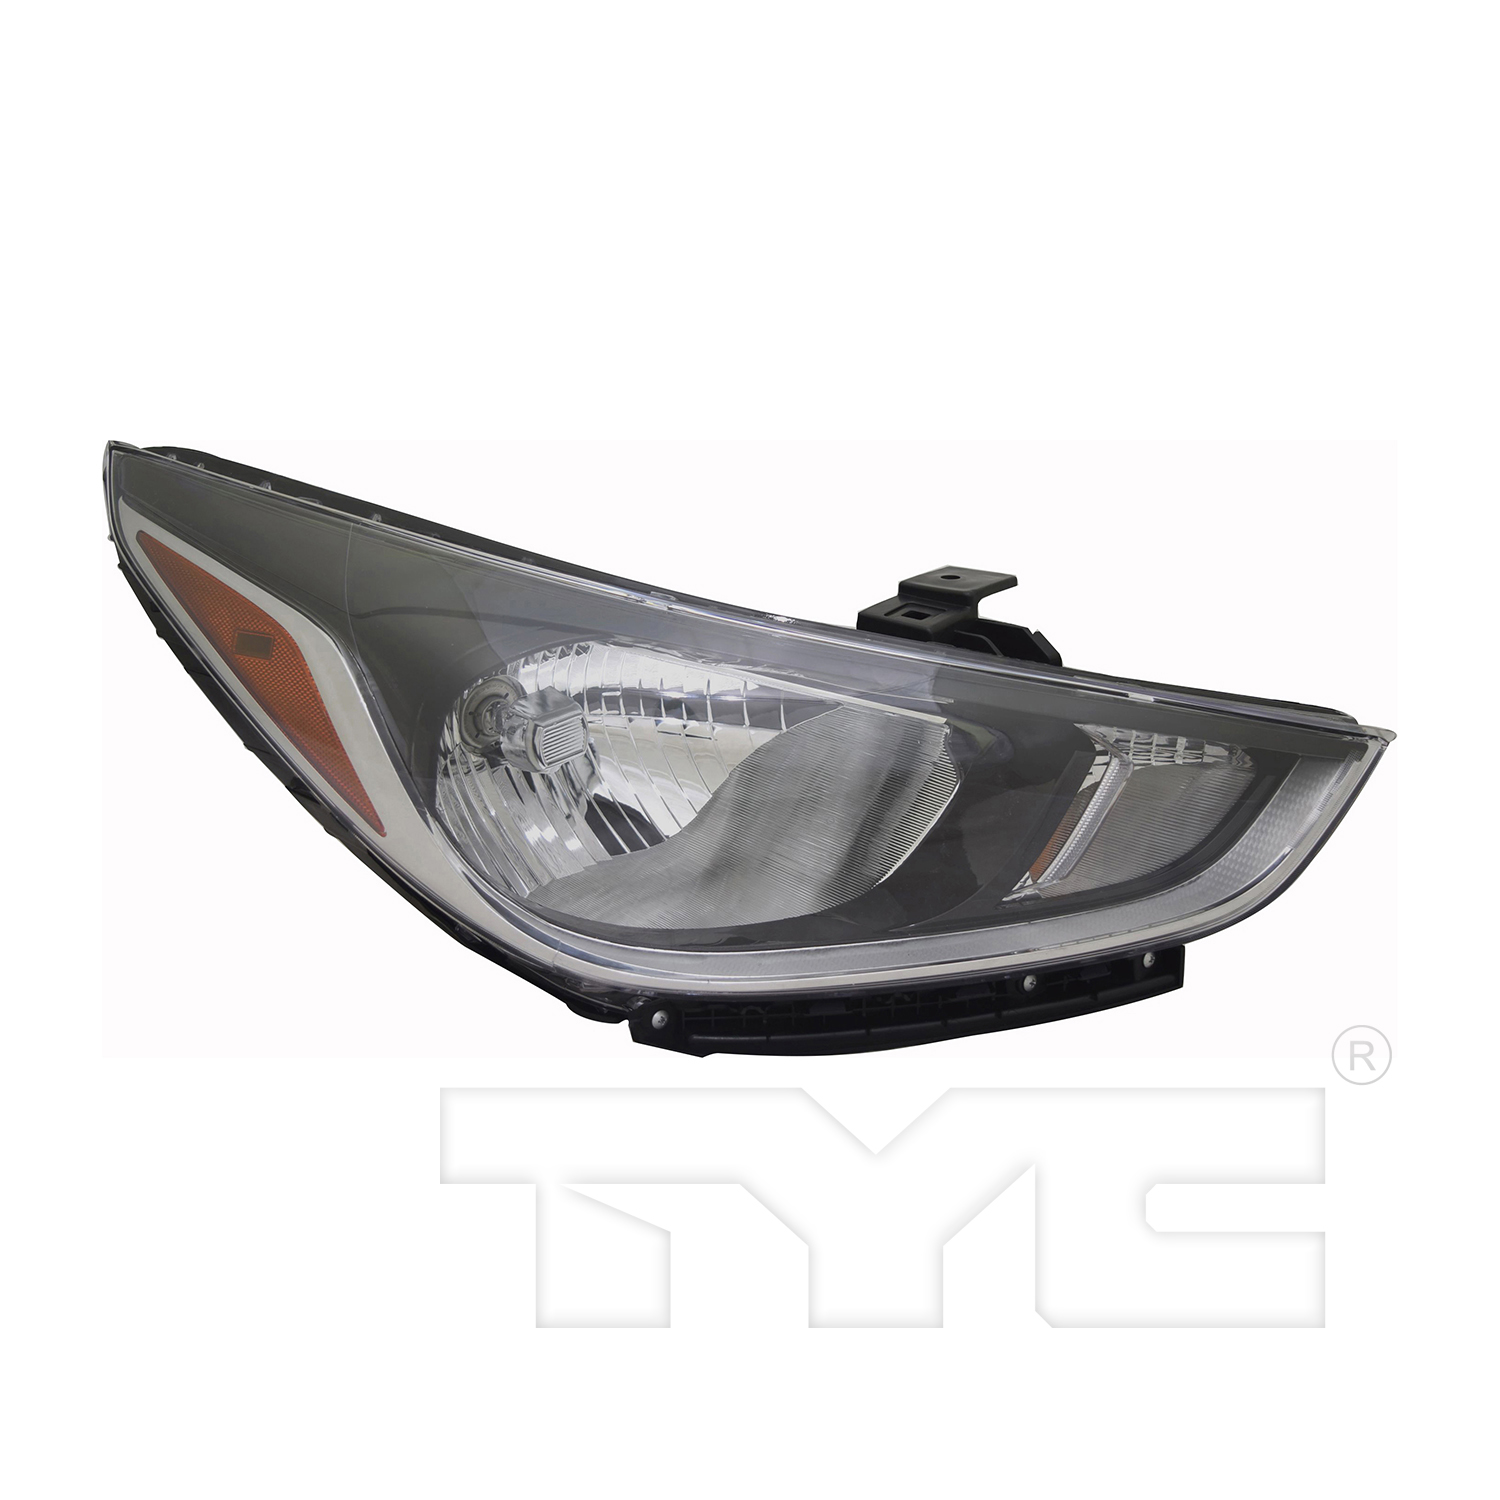 Aftermarket HEADLIGHTS for HYUNDAI - ACCENT, ACCENT,18-22,RT Headlamp assy composite